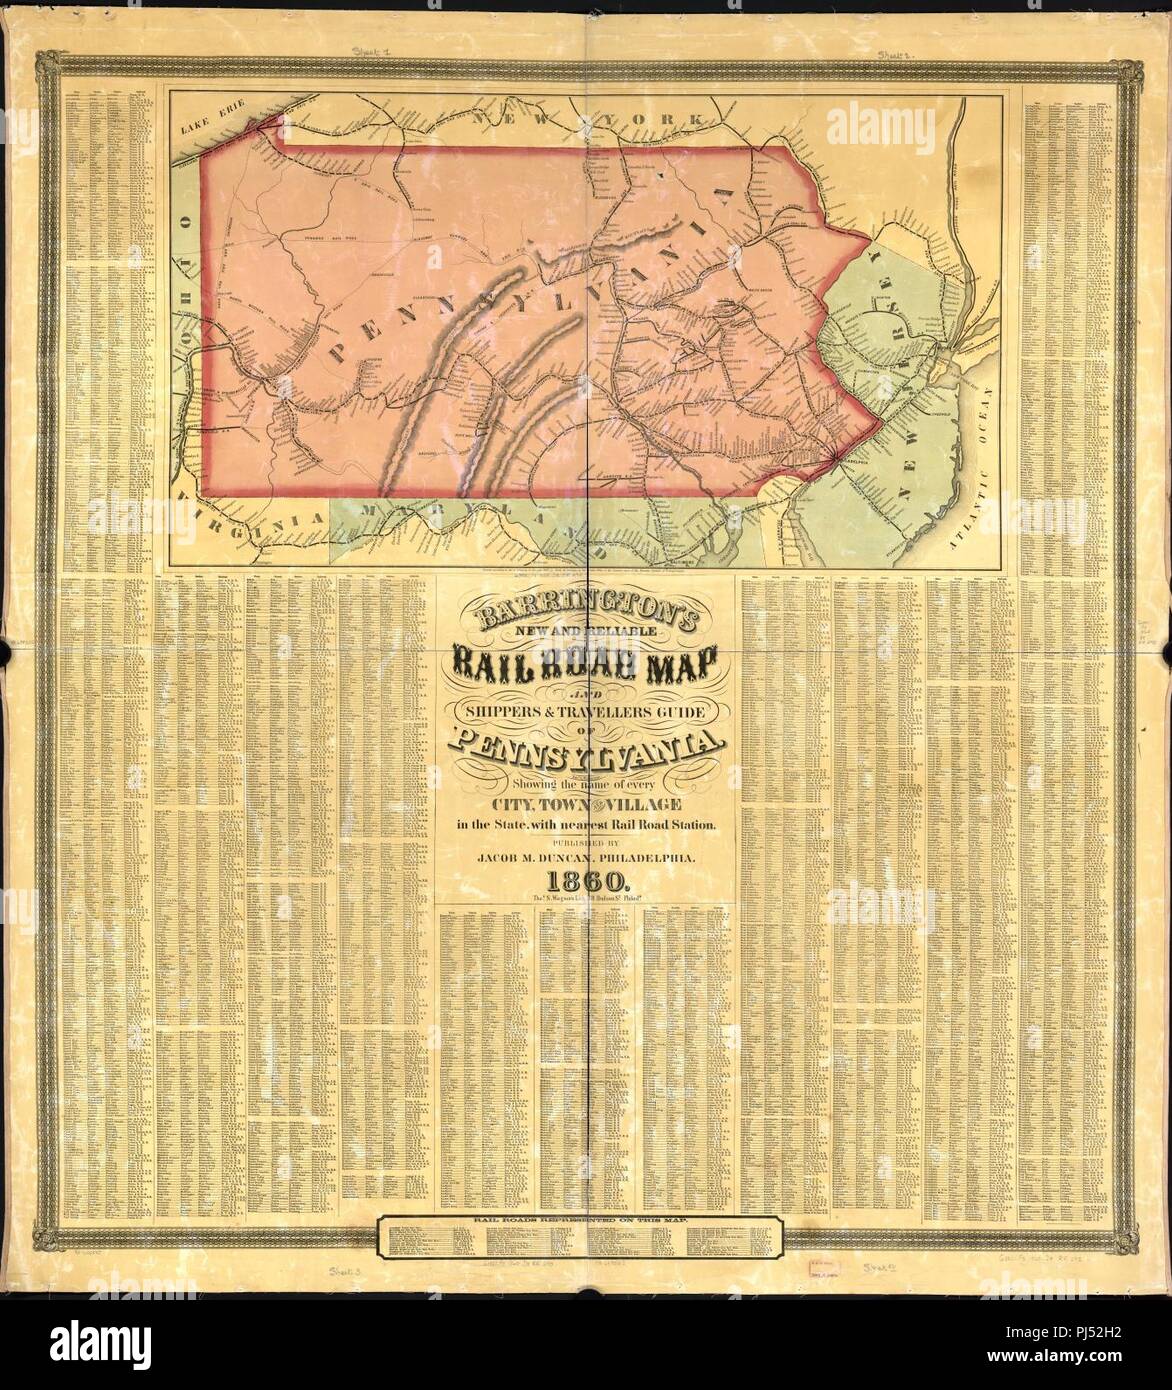 Barringtons new and reliable railroad map and shippers & travellers guide of Pennsylvania, Engrd. by Ths. Leonhardt, showing the name of every city, town and village in the state, with nearest rail Stock Photo